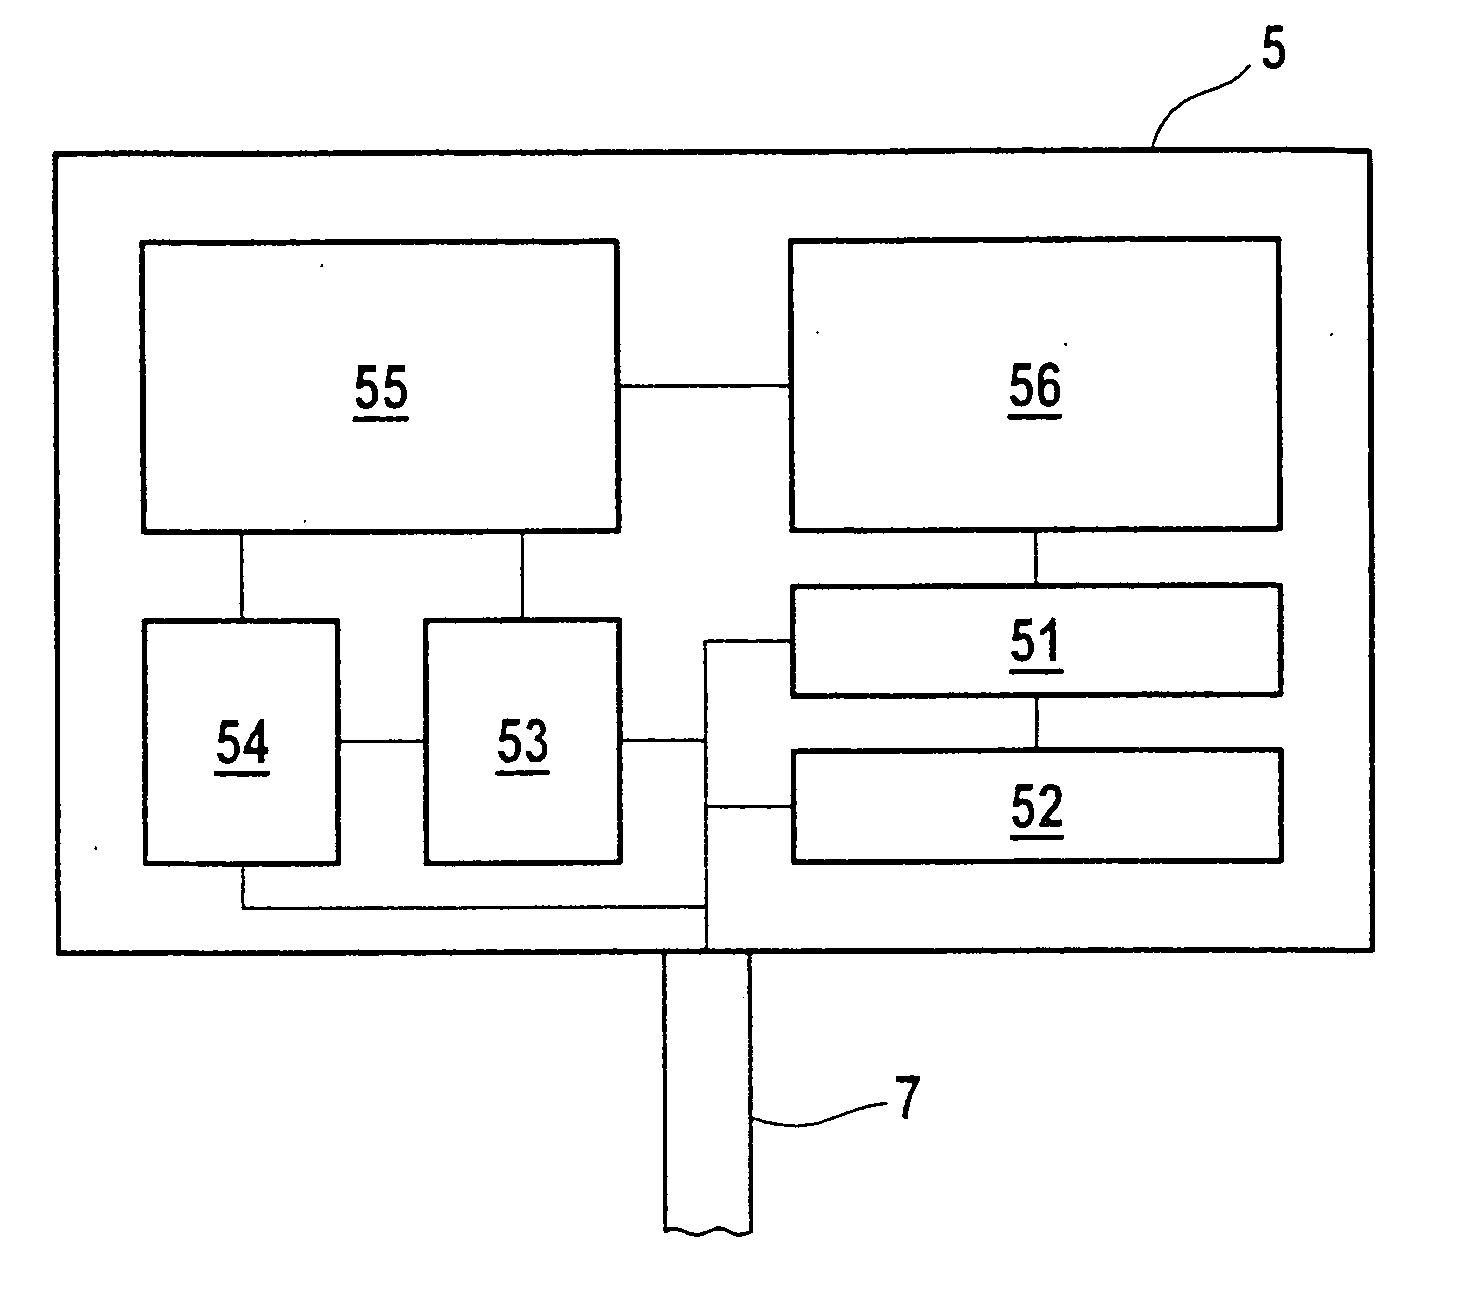 Method for transporting a signal in a radio network